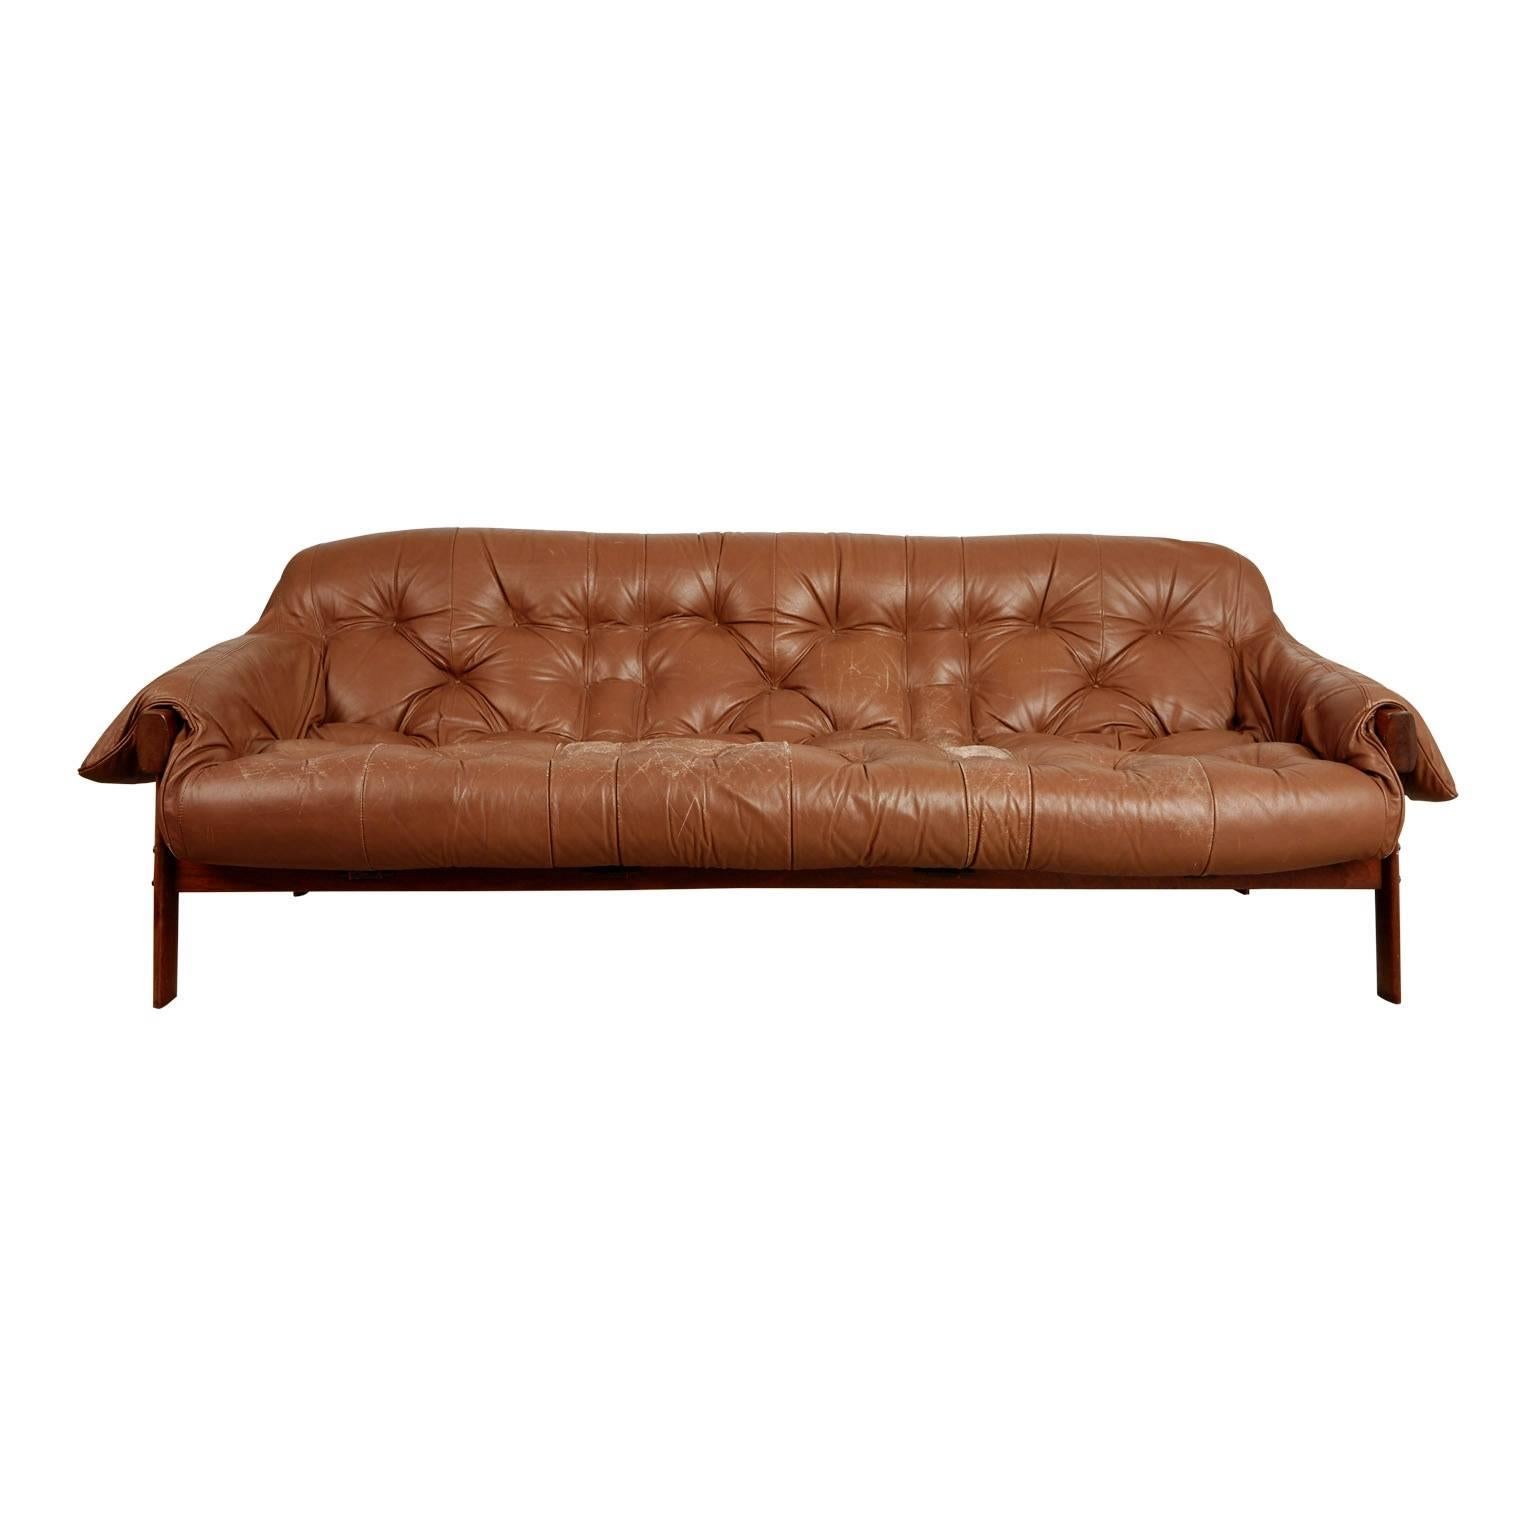 Percival Lafer Rosewood and Distressed Leather Tufted Sofa, Brazil, circa 1960